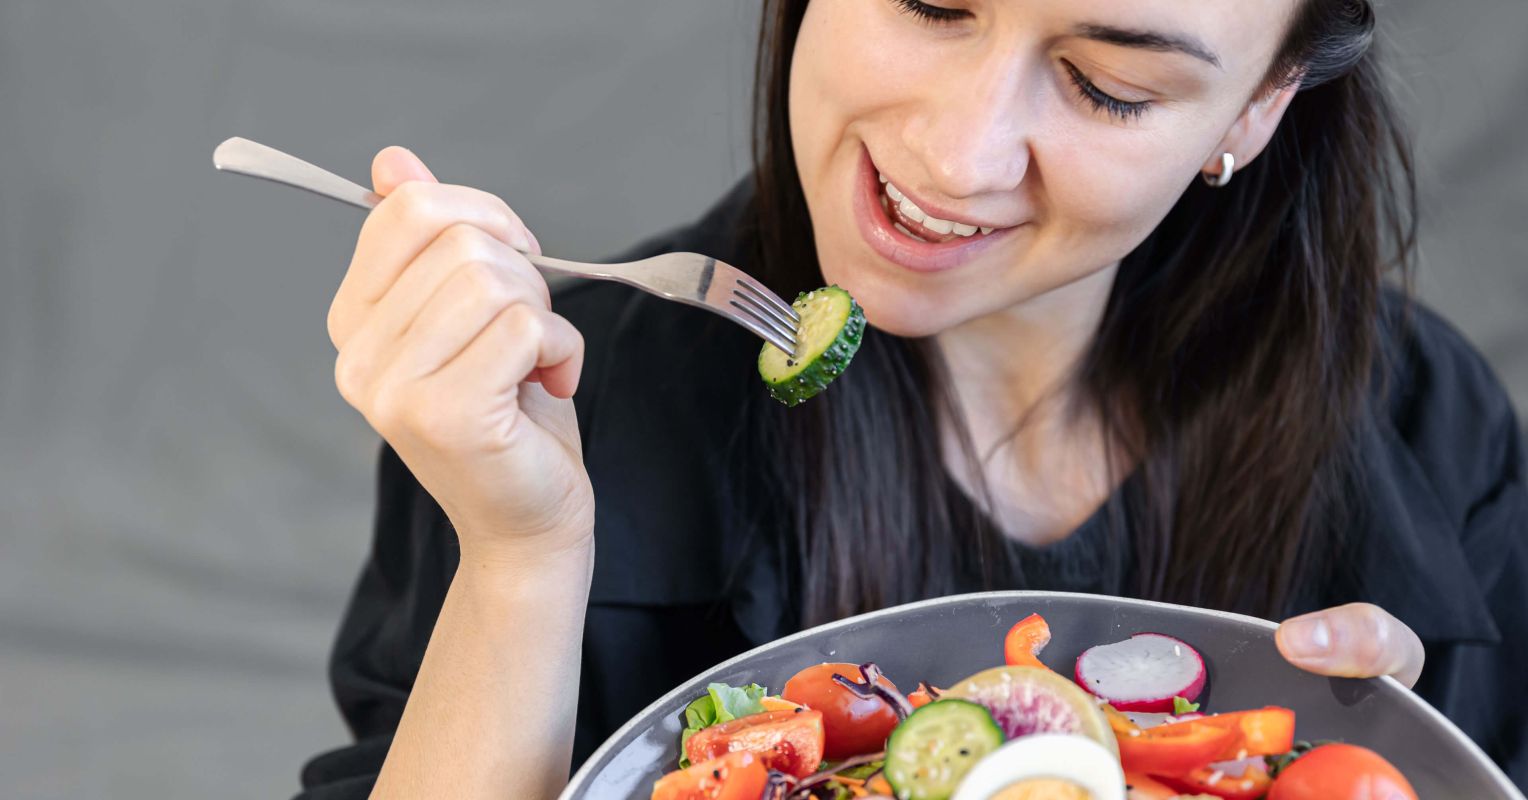 4 Nutrition Lessons for Mental Health | Psychology Today New Zealand